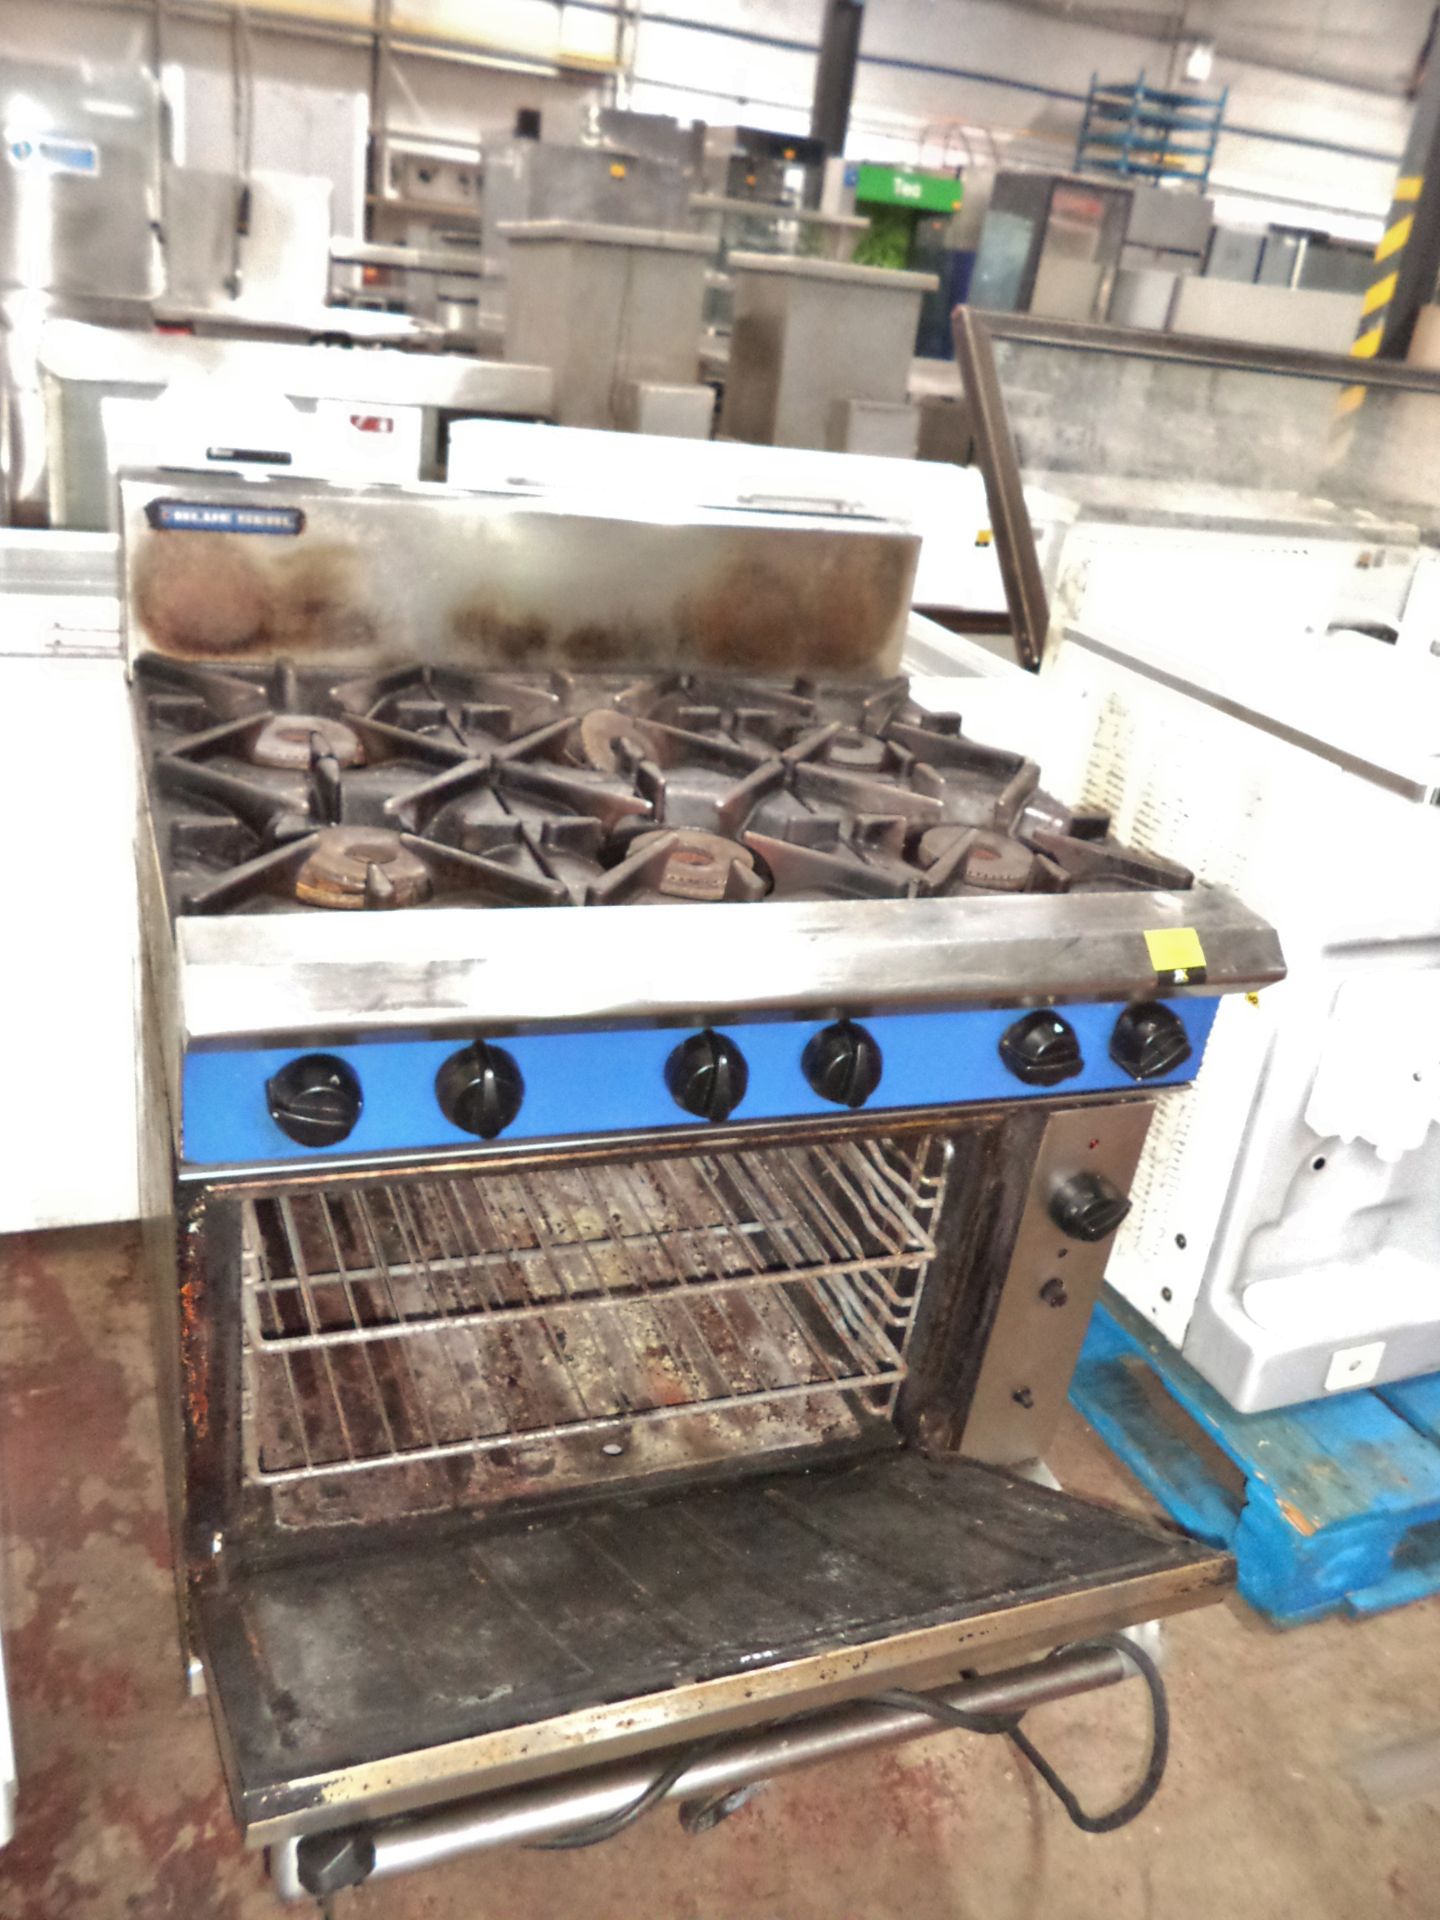 Blue Seal stainless steel 6-ring oven IMPORTANT: Please remember goods successfully bid upon must be - Image 3 of 3